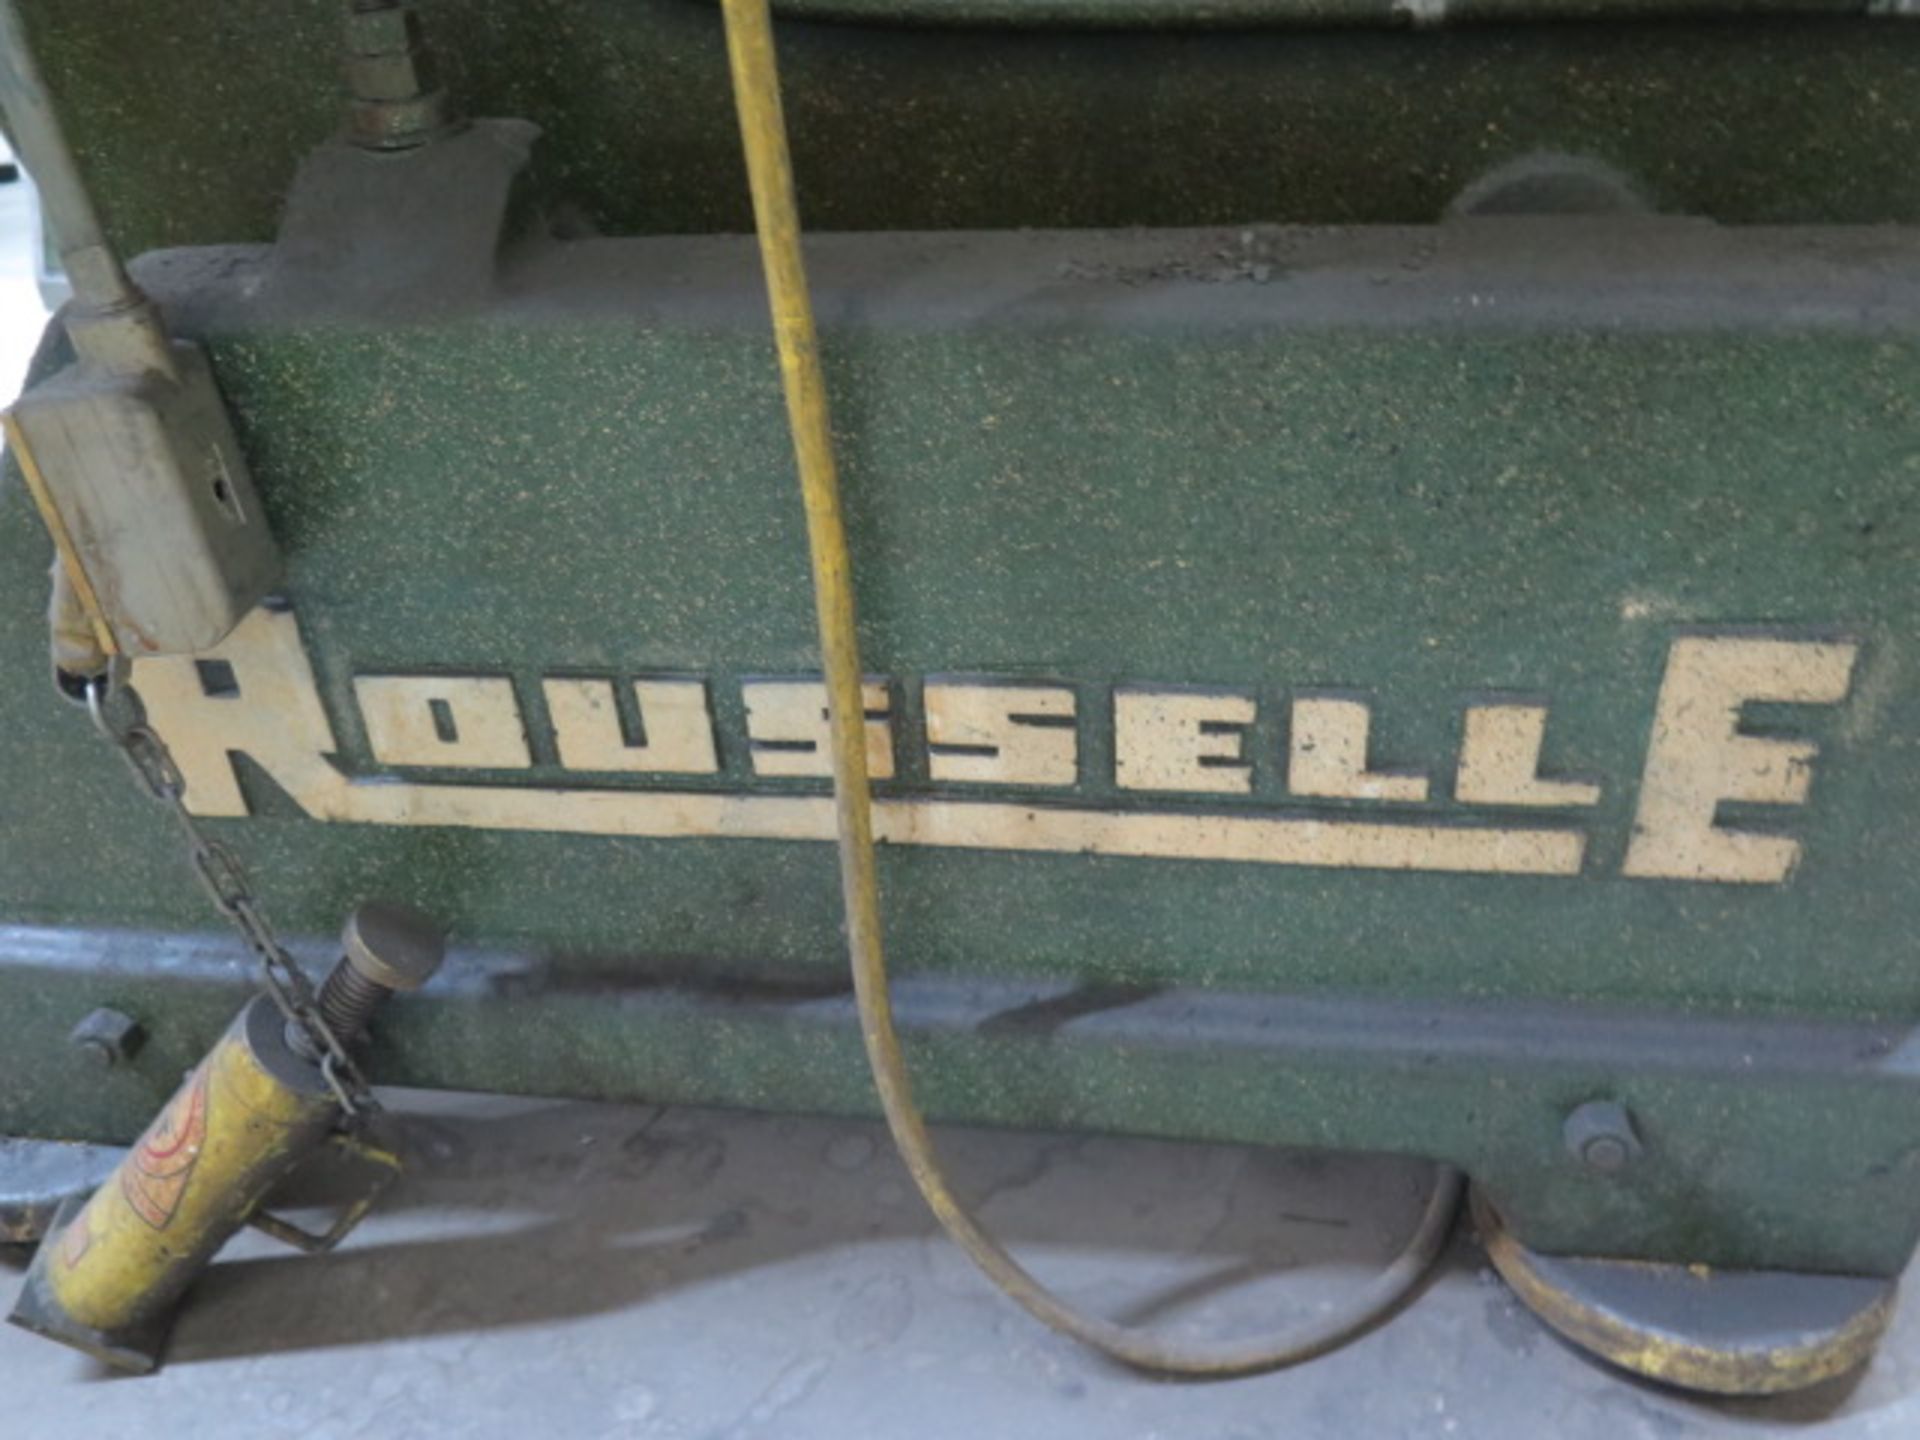 Rousselle No. 6A 60 Ton OBI Stamping Press SOLD AS PARTS ONLY, SOLD AS IS - NO WARRANTY - Image 10 of 11